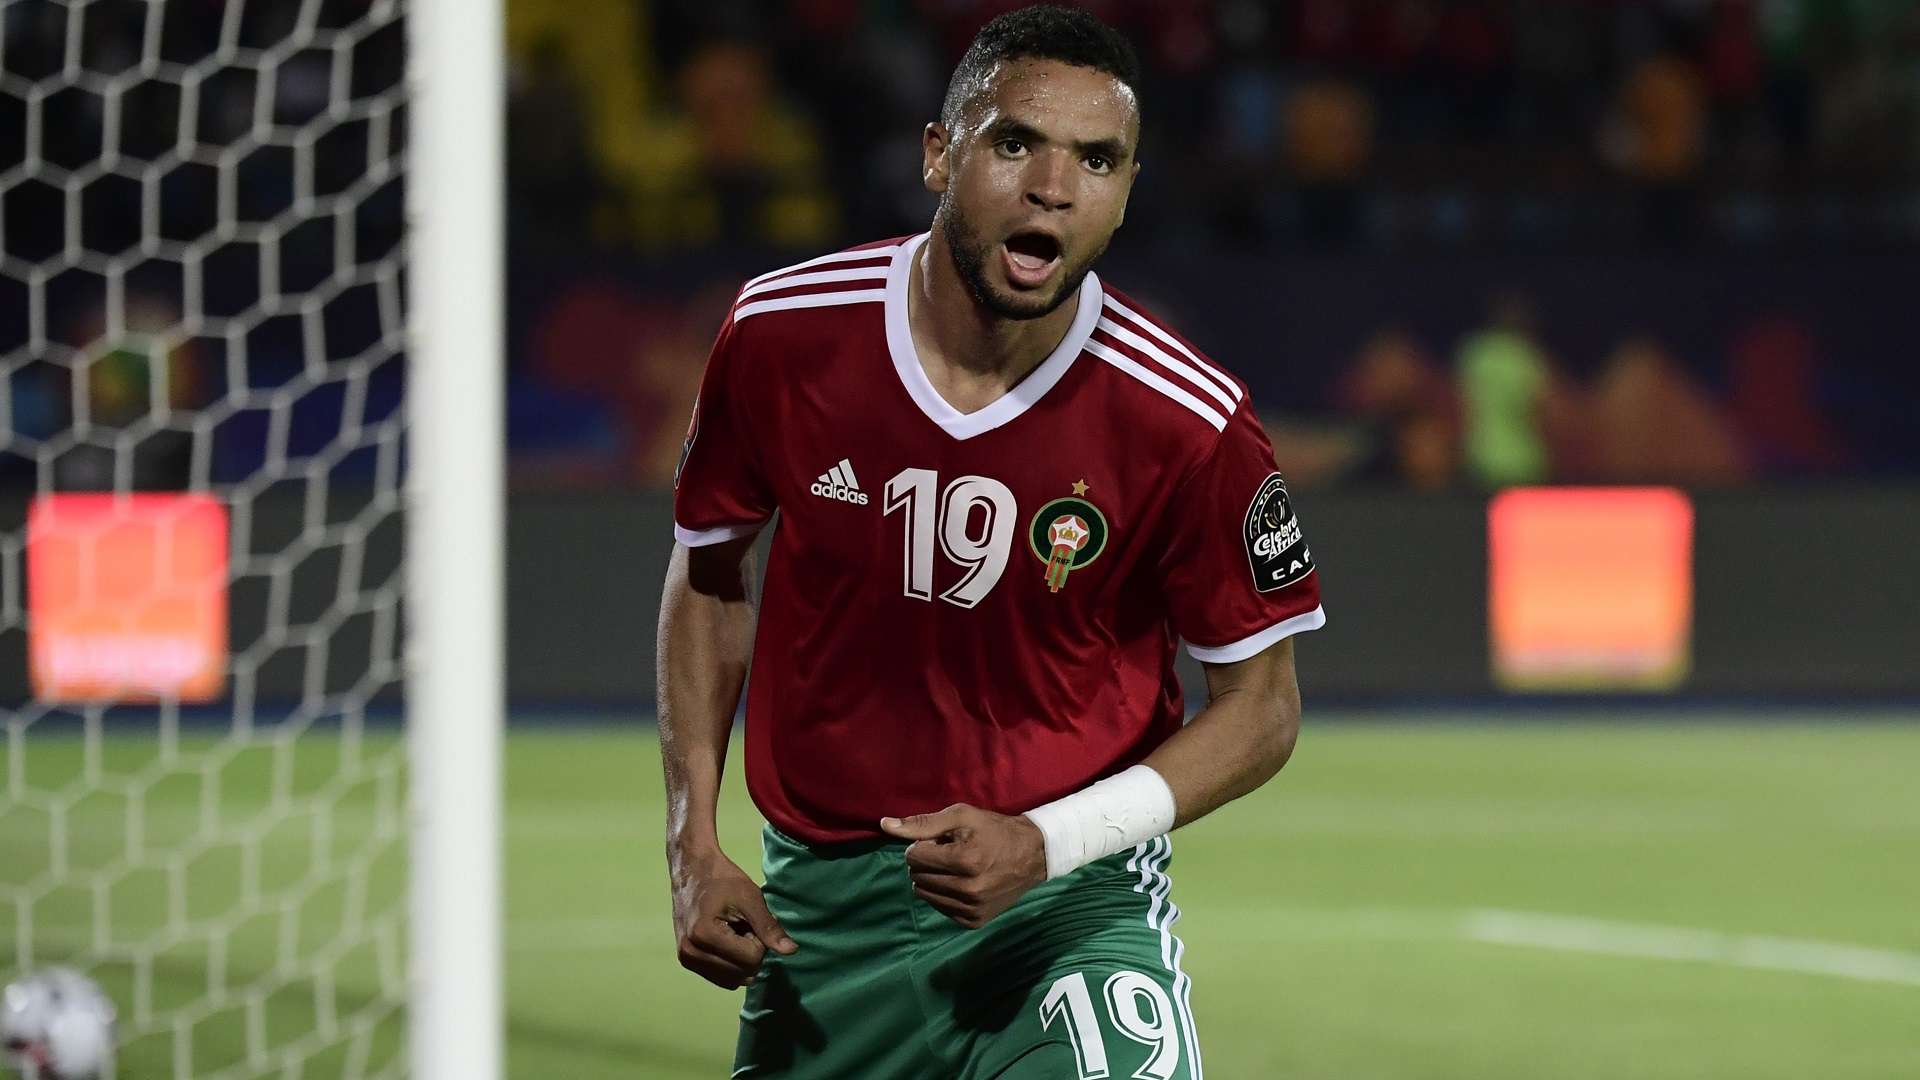 Morocco's forward Youssef En-Nesyri celebrates after scoring during the 2019 Africa Cup of Nations